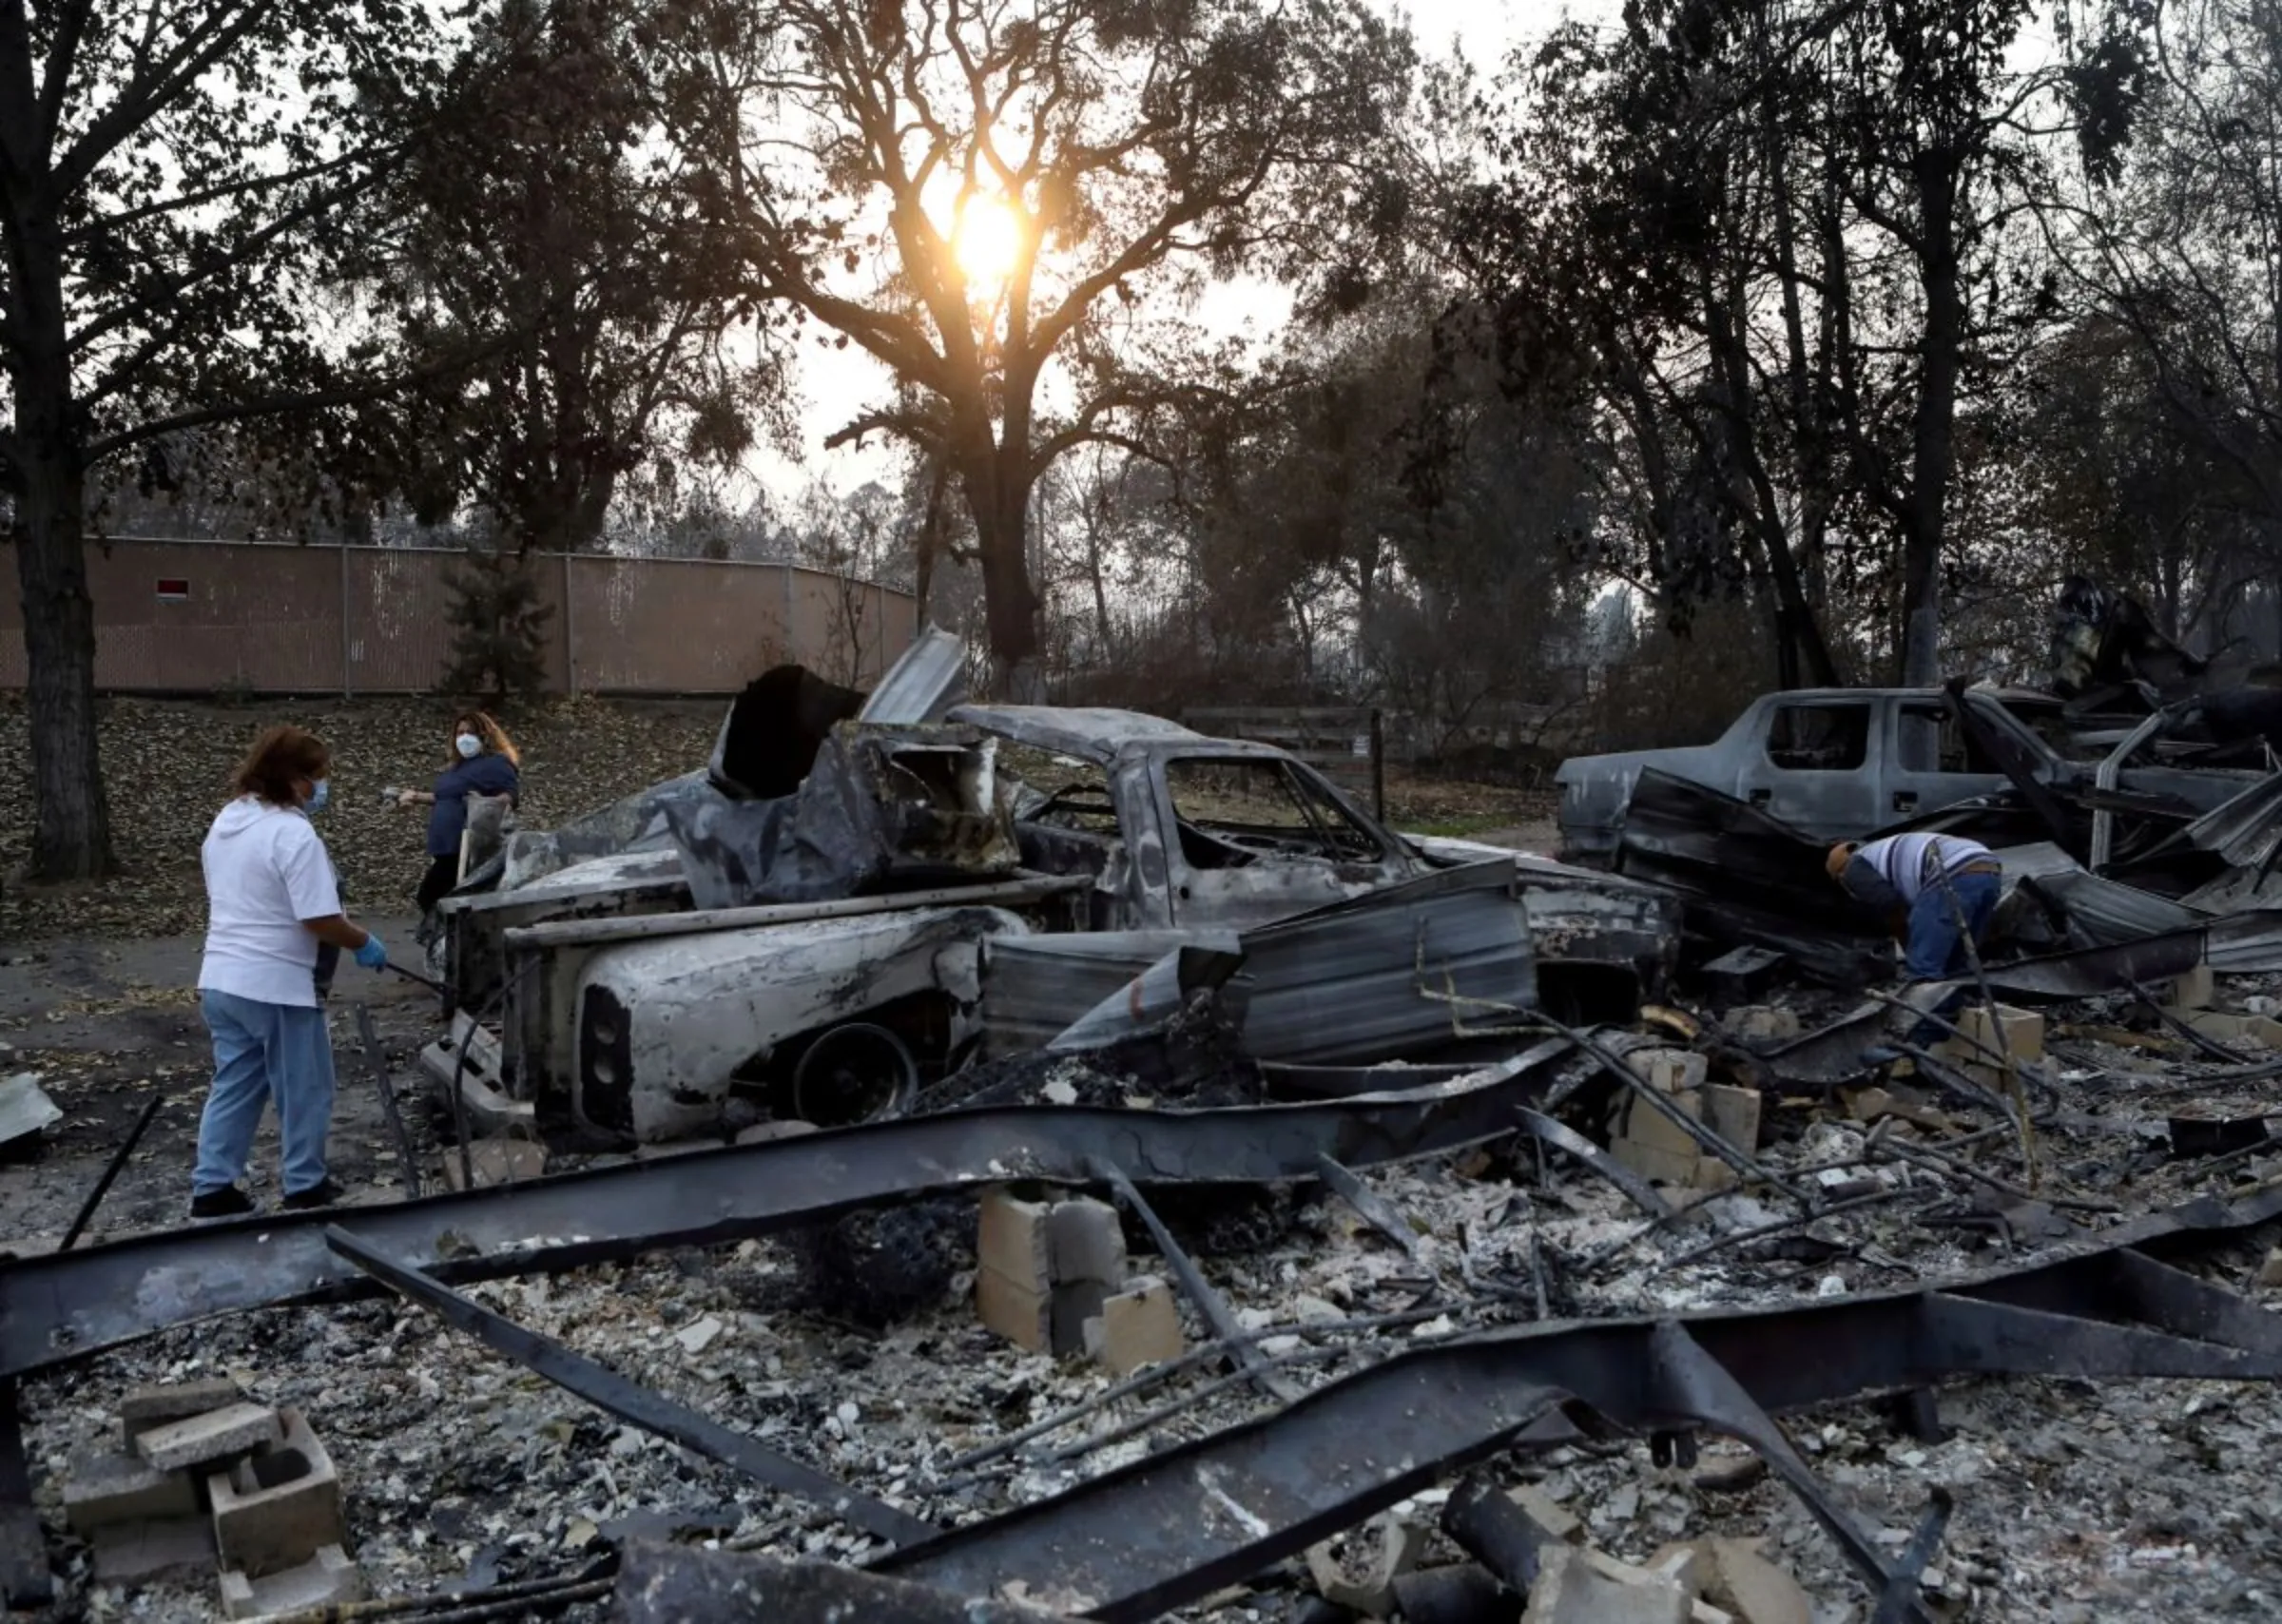 Residents search for items to salvage in the remains of their burned home, which was destroyed by a wildfire in Phoenix, Oregon, U.S. September 22, 2020. REUTERS/Jim Urquhart